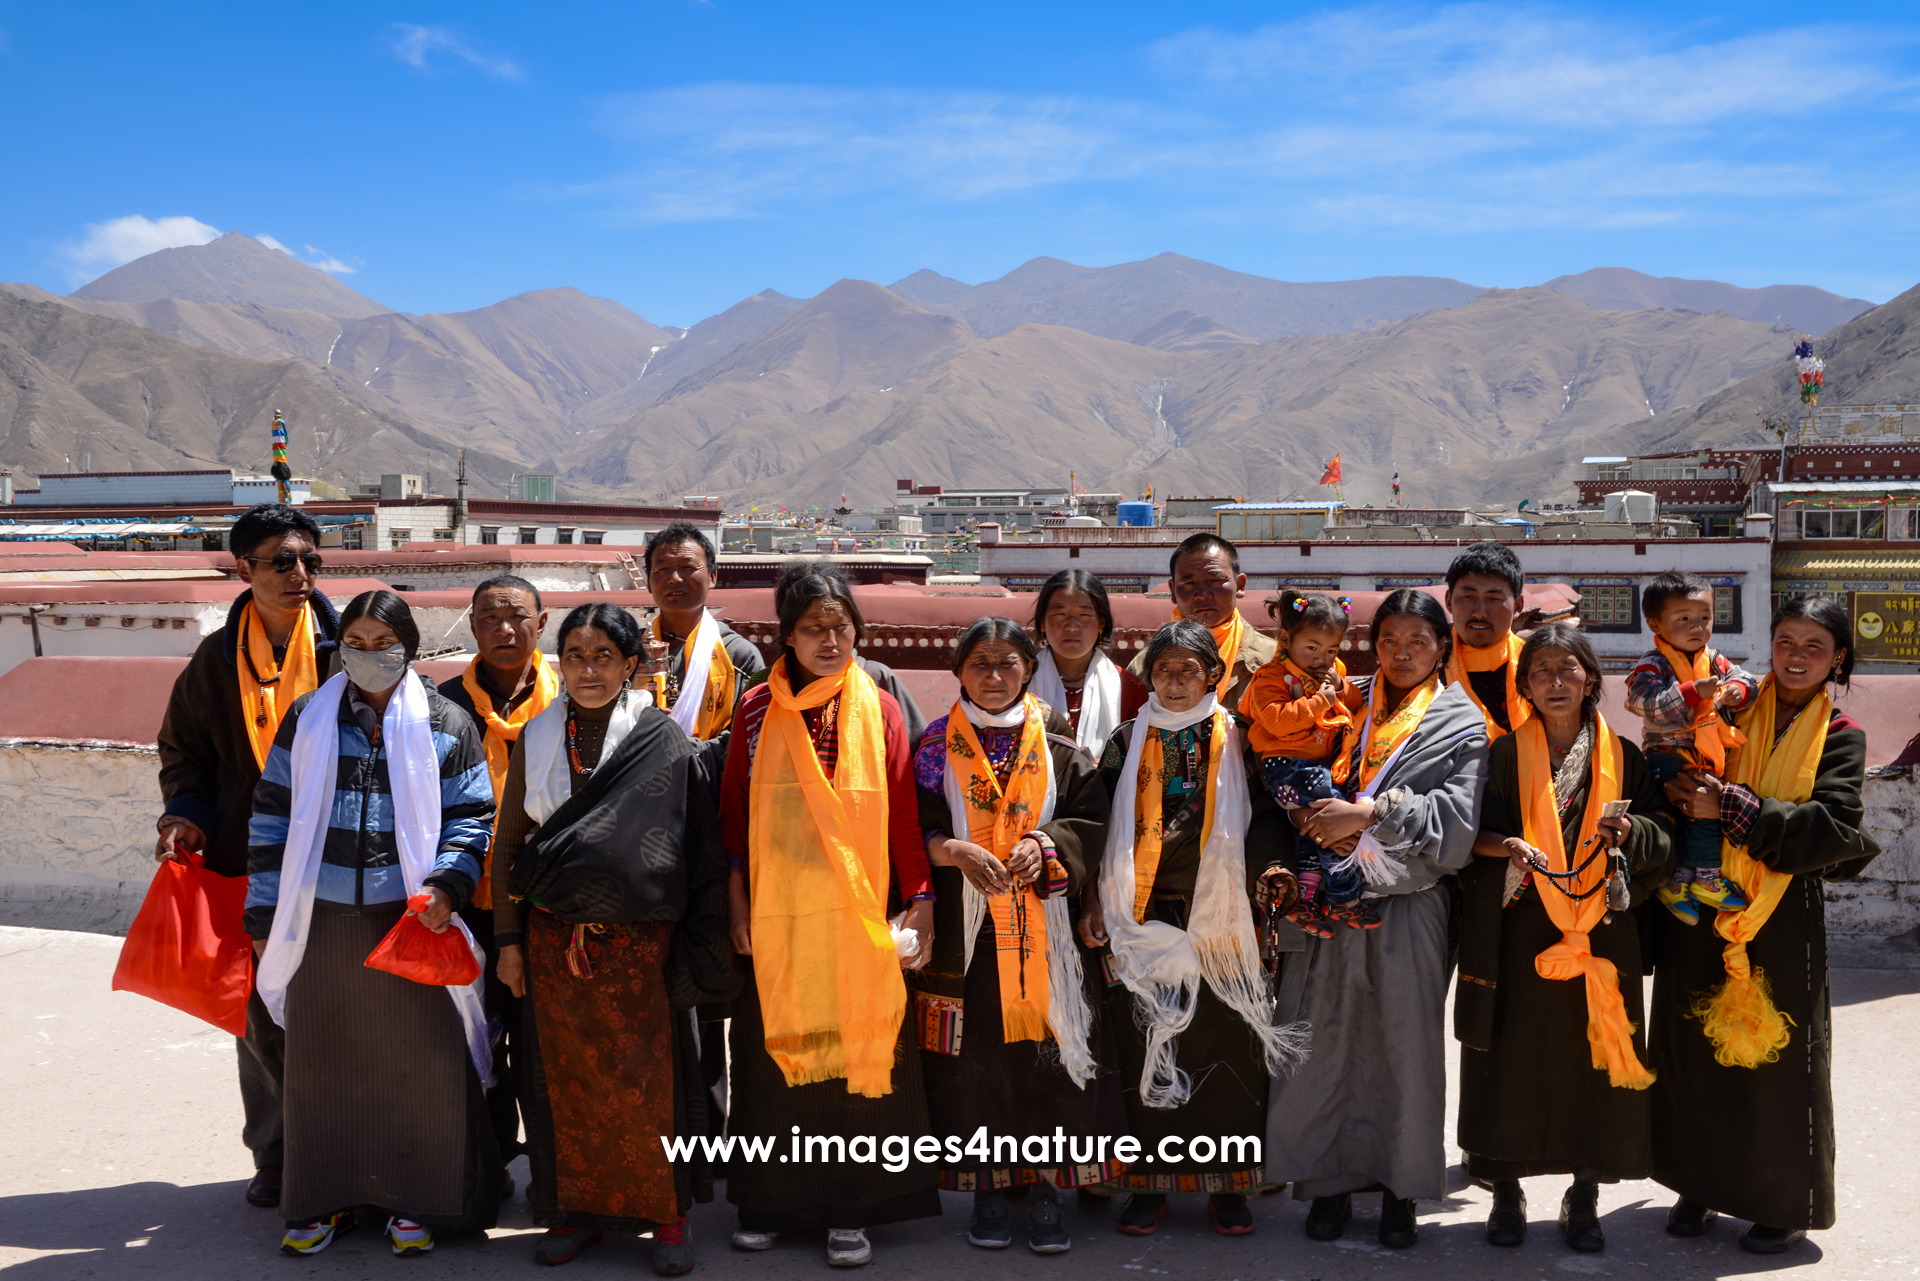 A group of sixteen Tibetan pilgrims on top of the Jokhang Temple against sky and mountain range